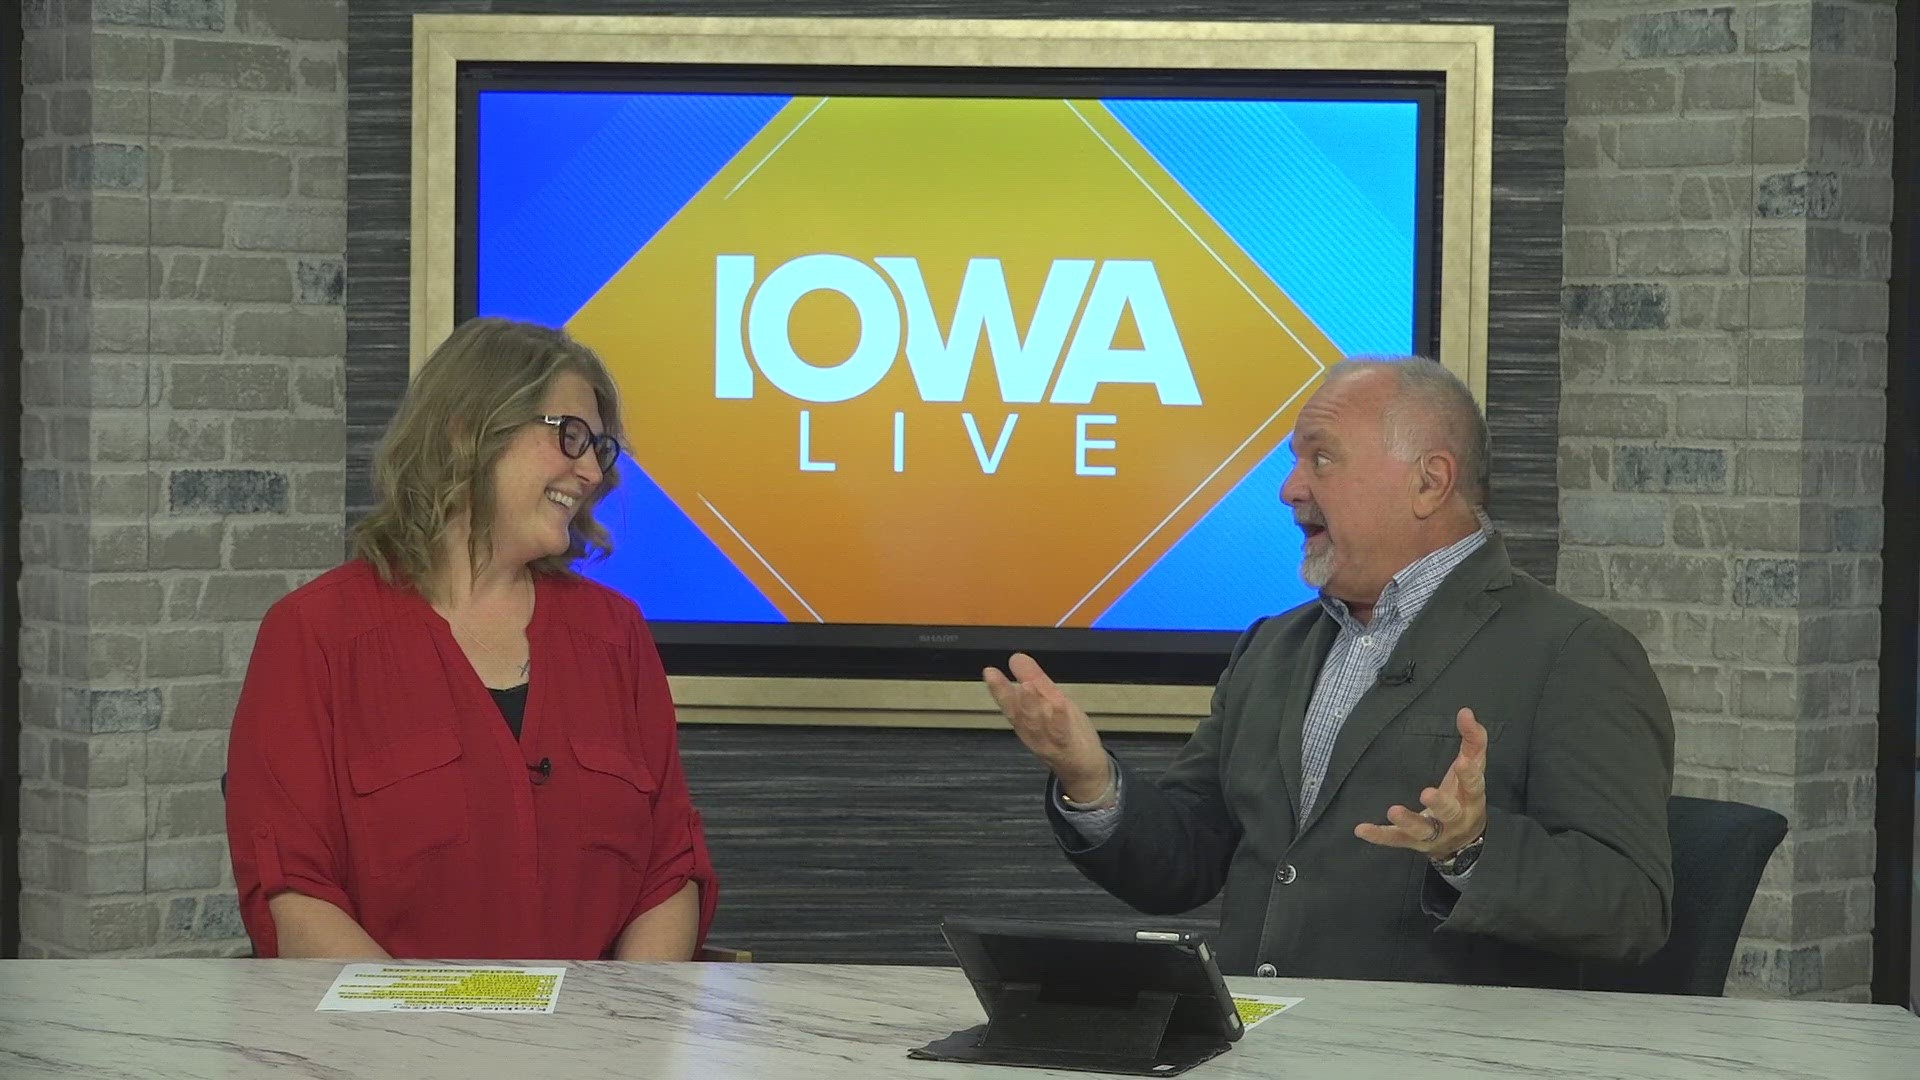 Krable Mentzer from Easterseals Iowa talks about the importance of employing people with disabilities, and how companies can benefit